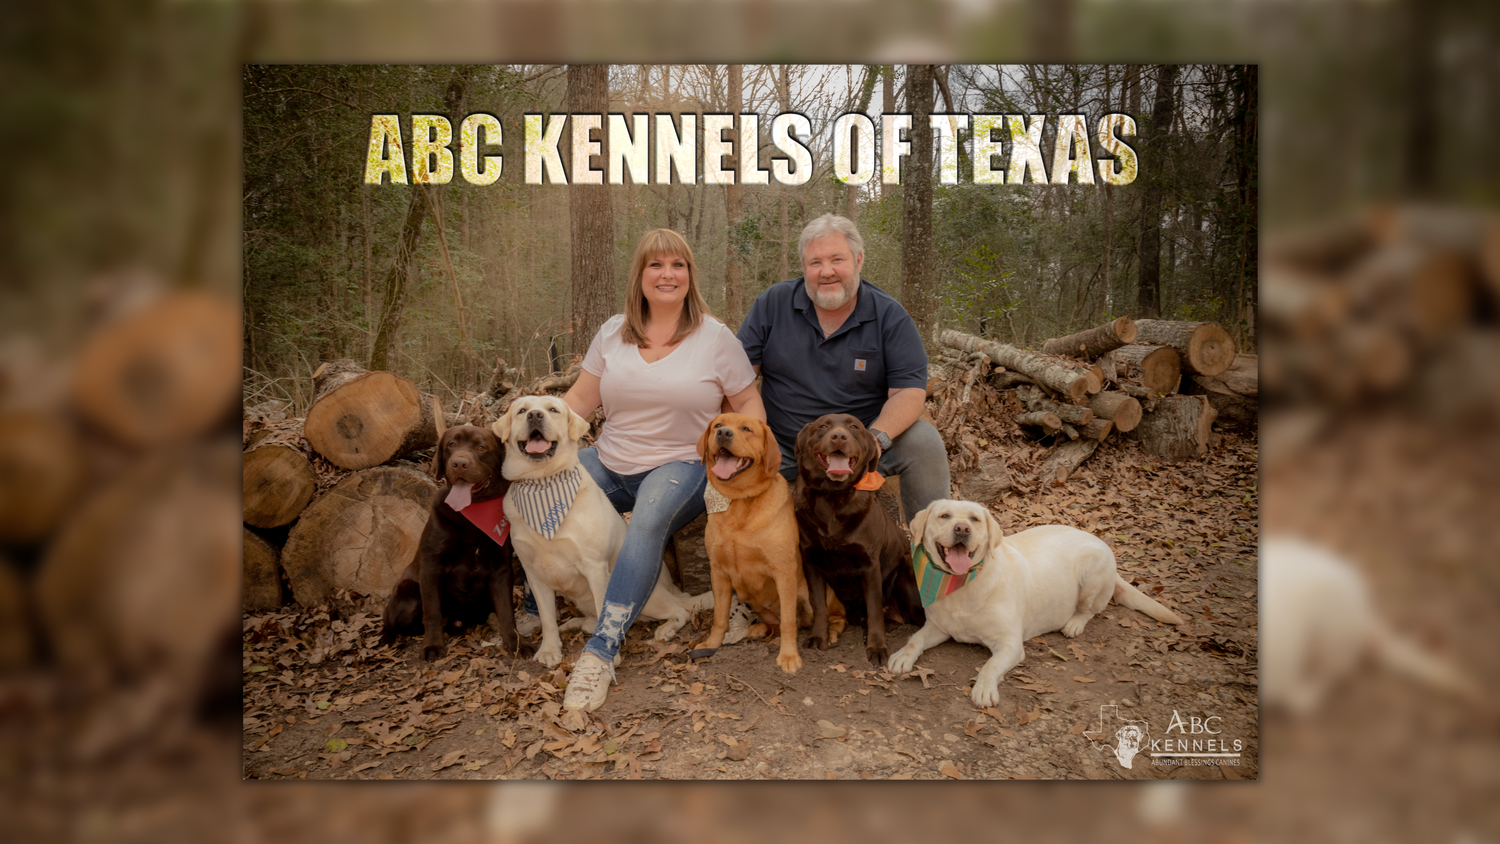 ABC Kennels of Texas owners Mike and Shannon Harris with their breed stock Labrador retrievers